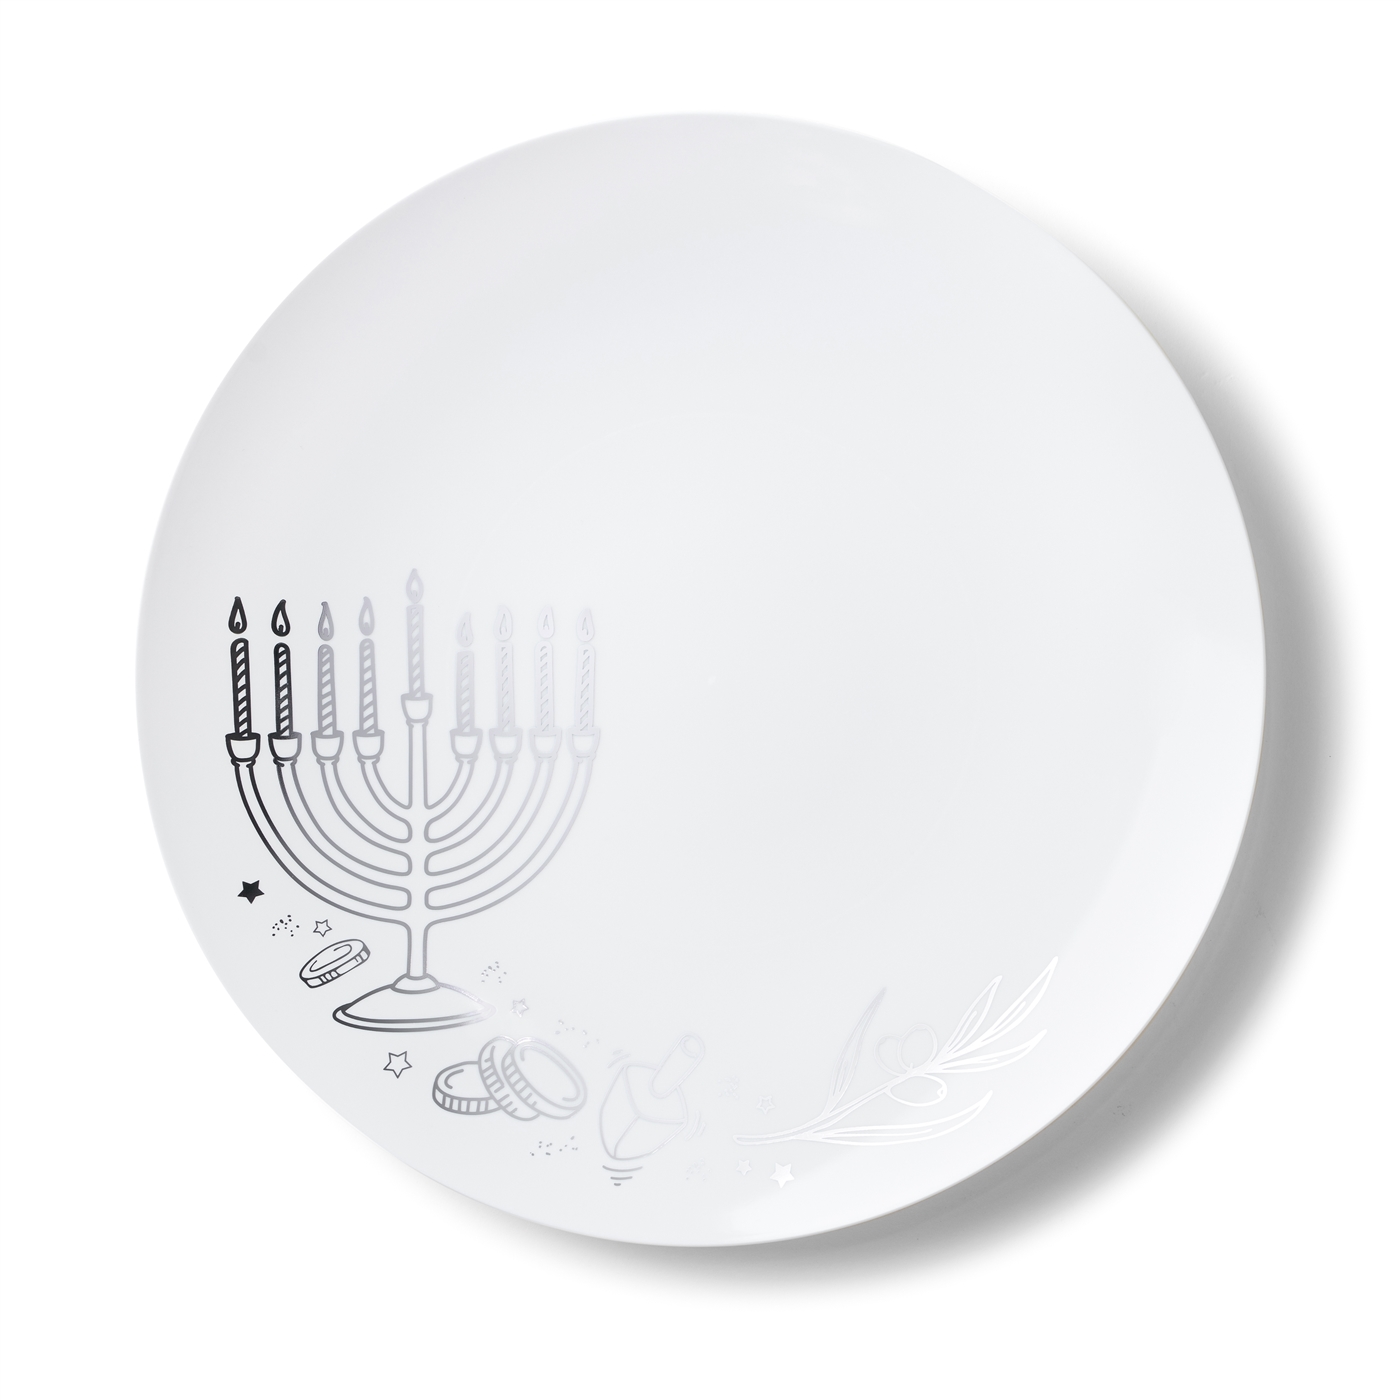 Decor Chanukah Plates Collection White with Silver